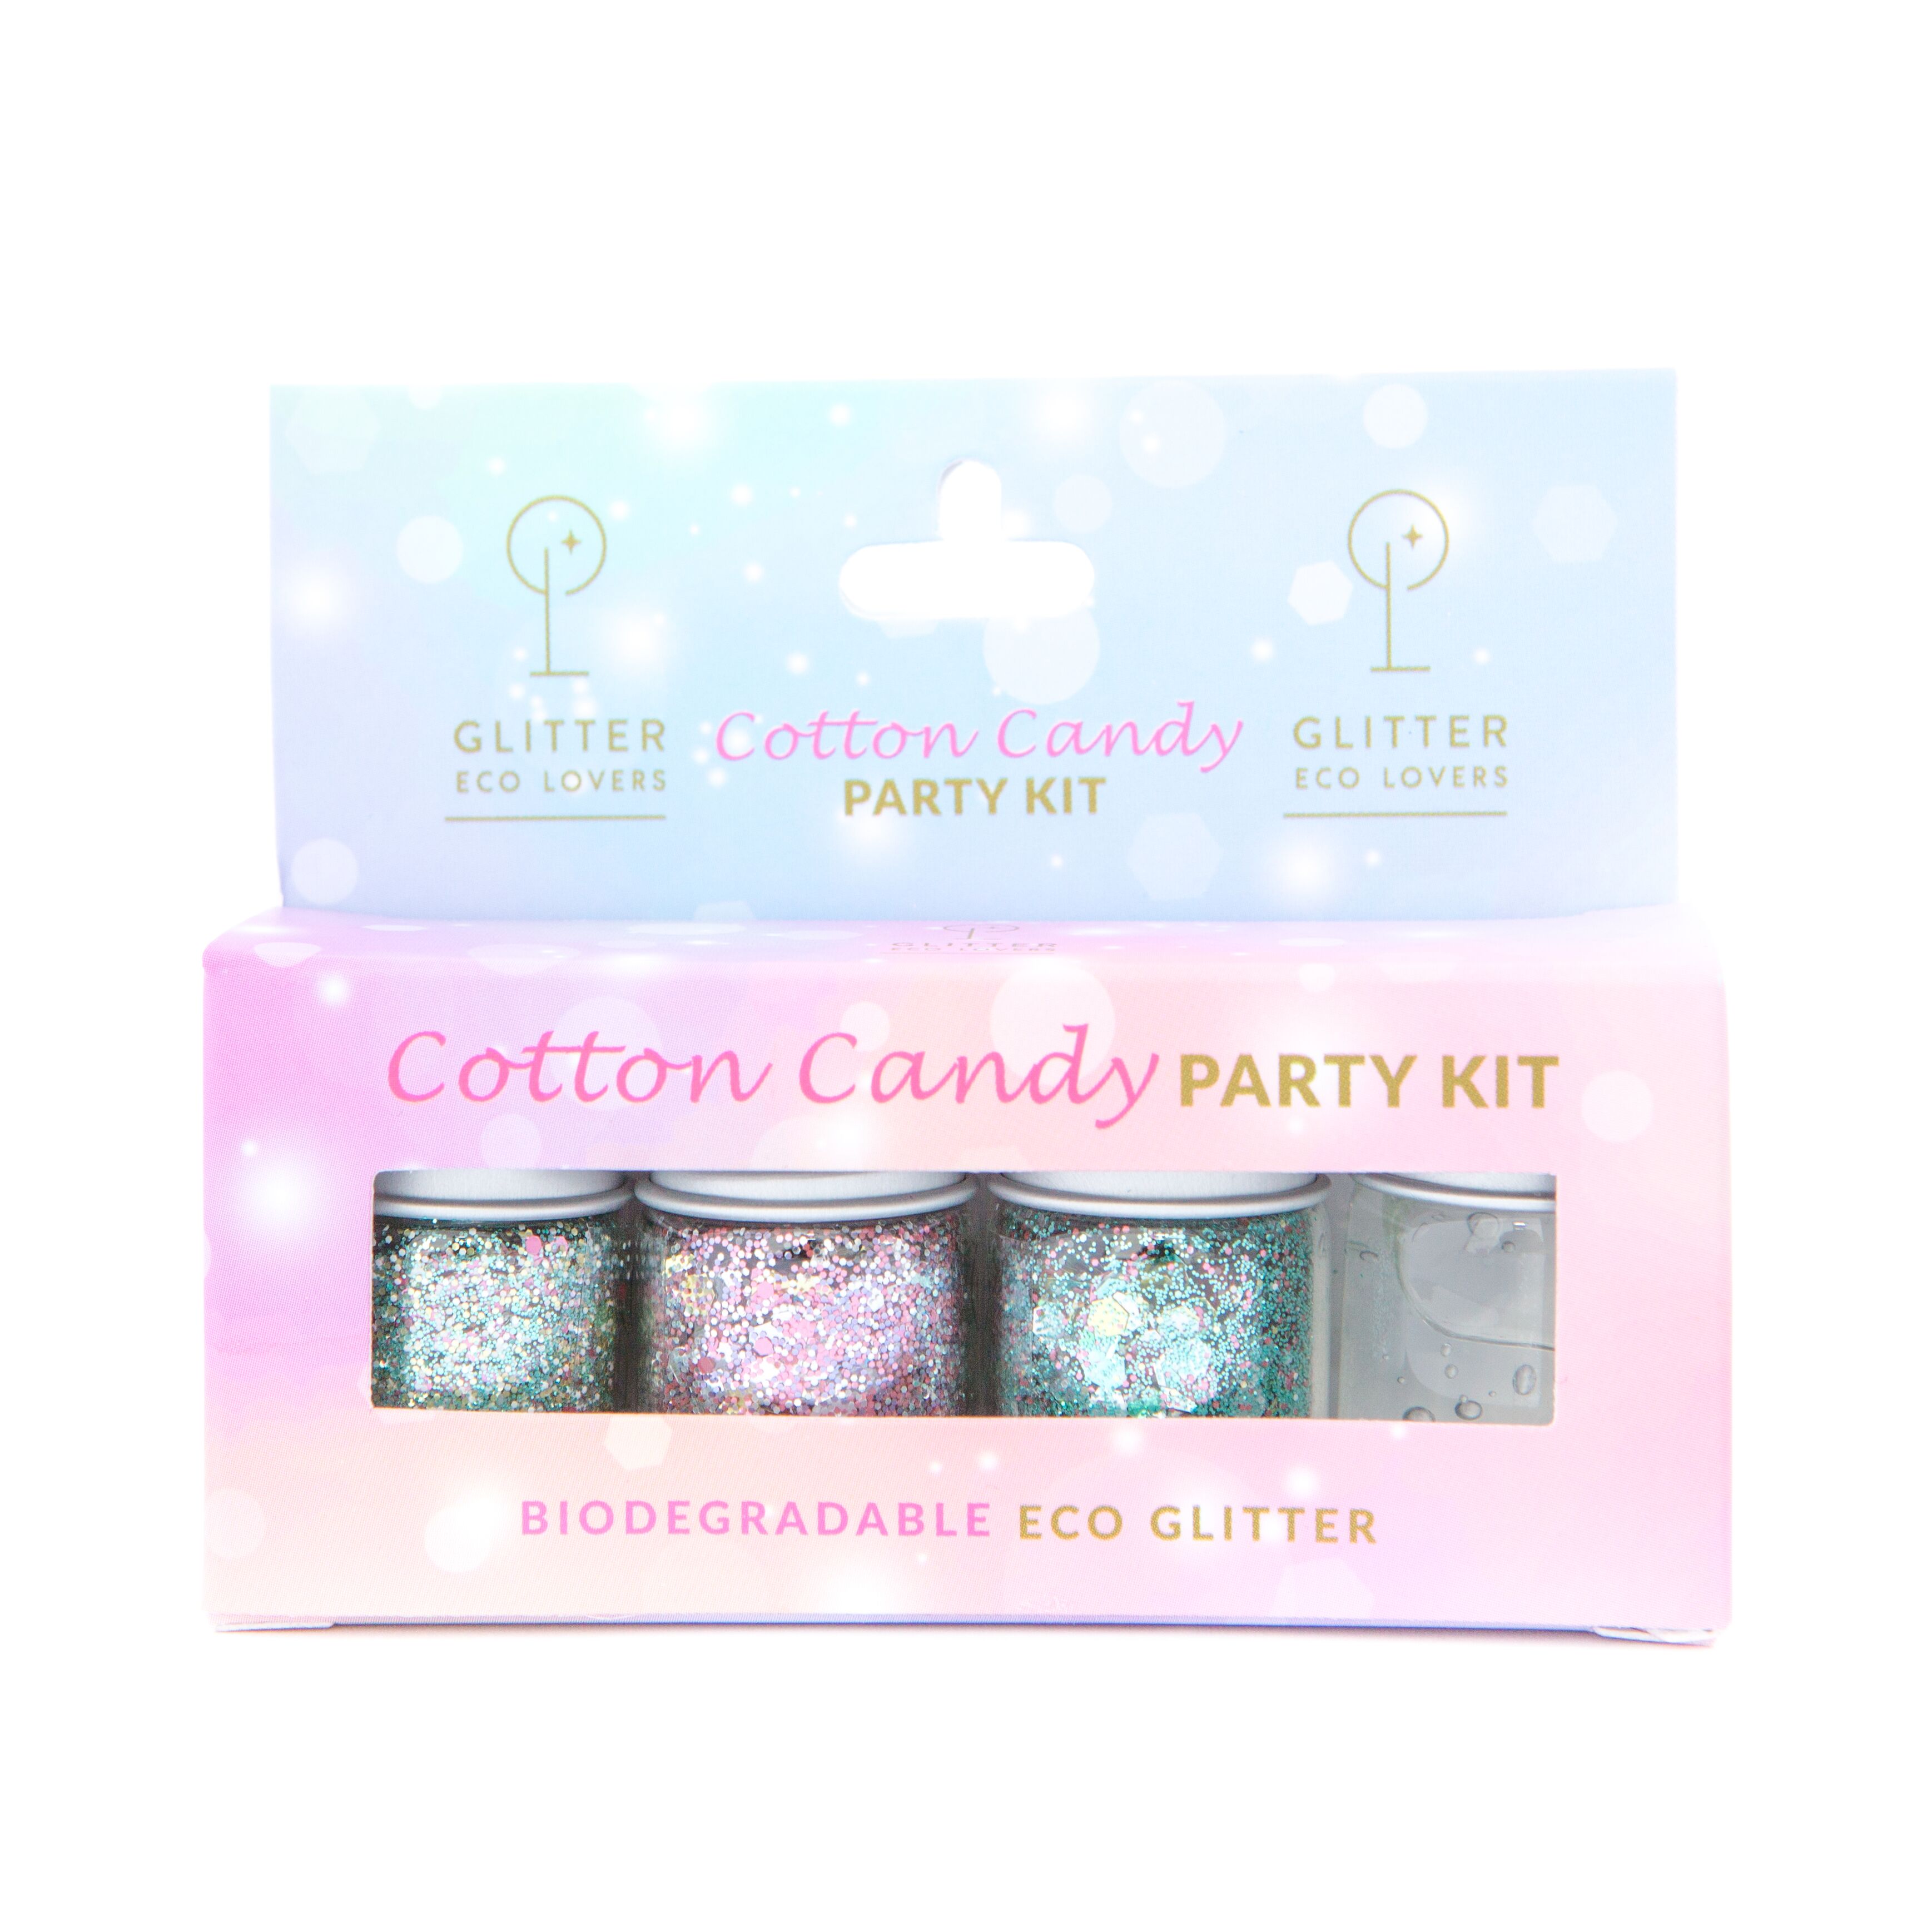 Cotton Candy Party kit